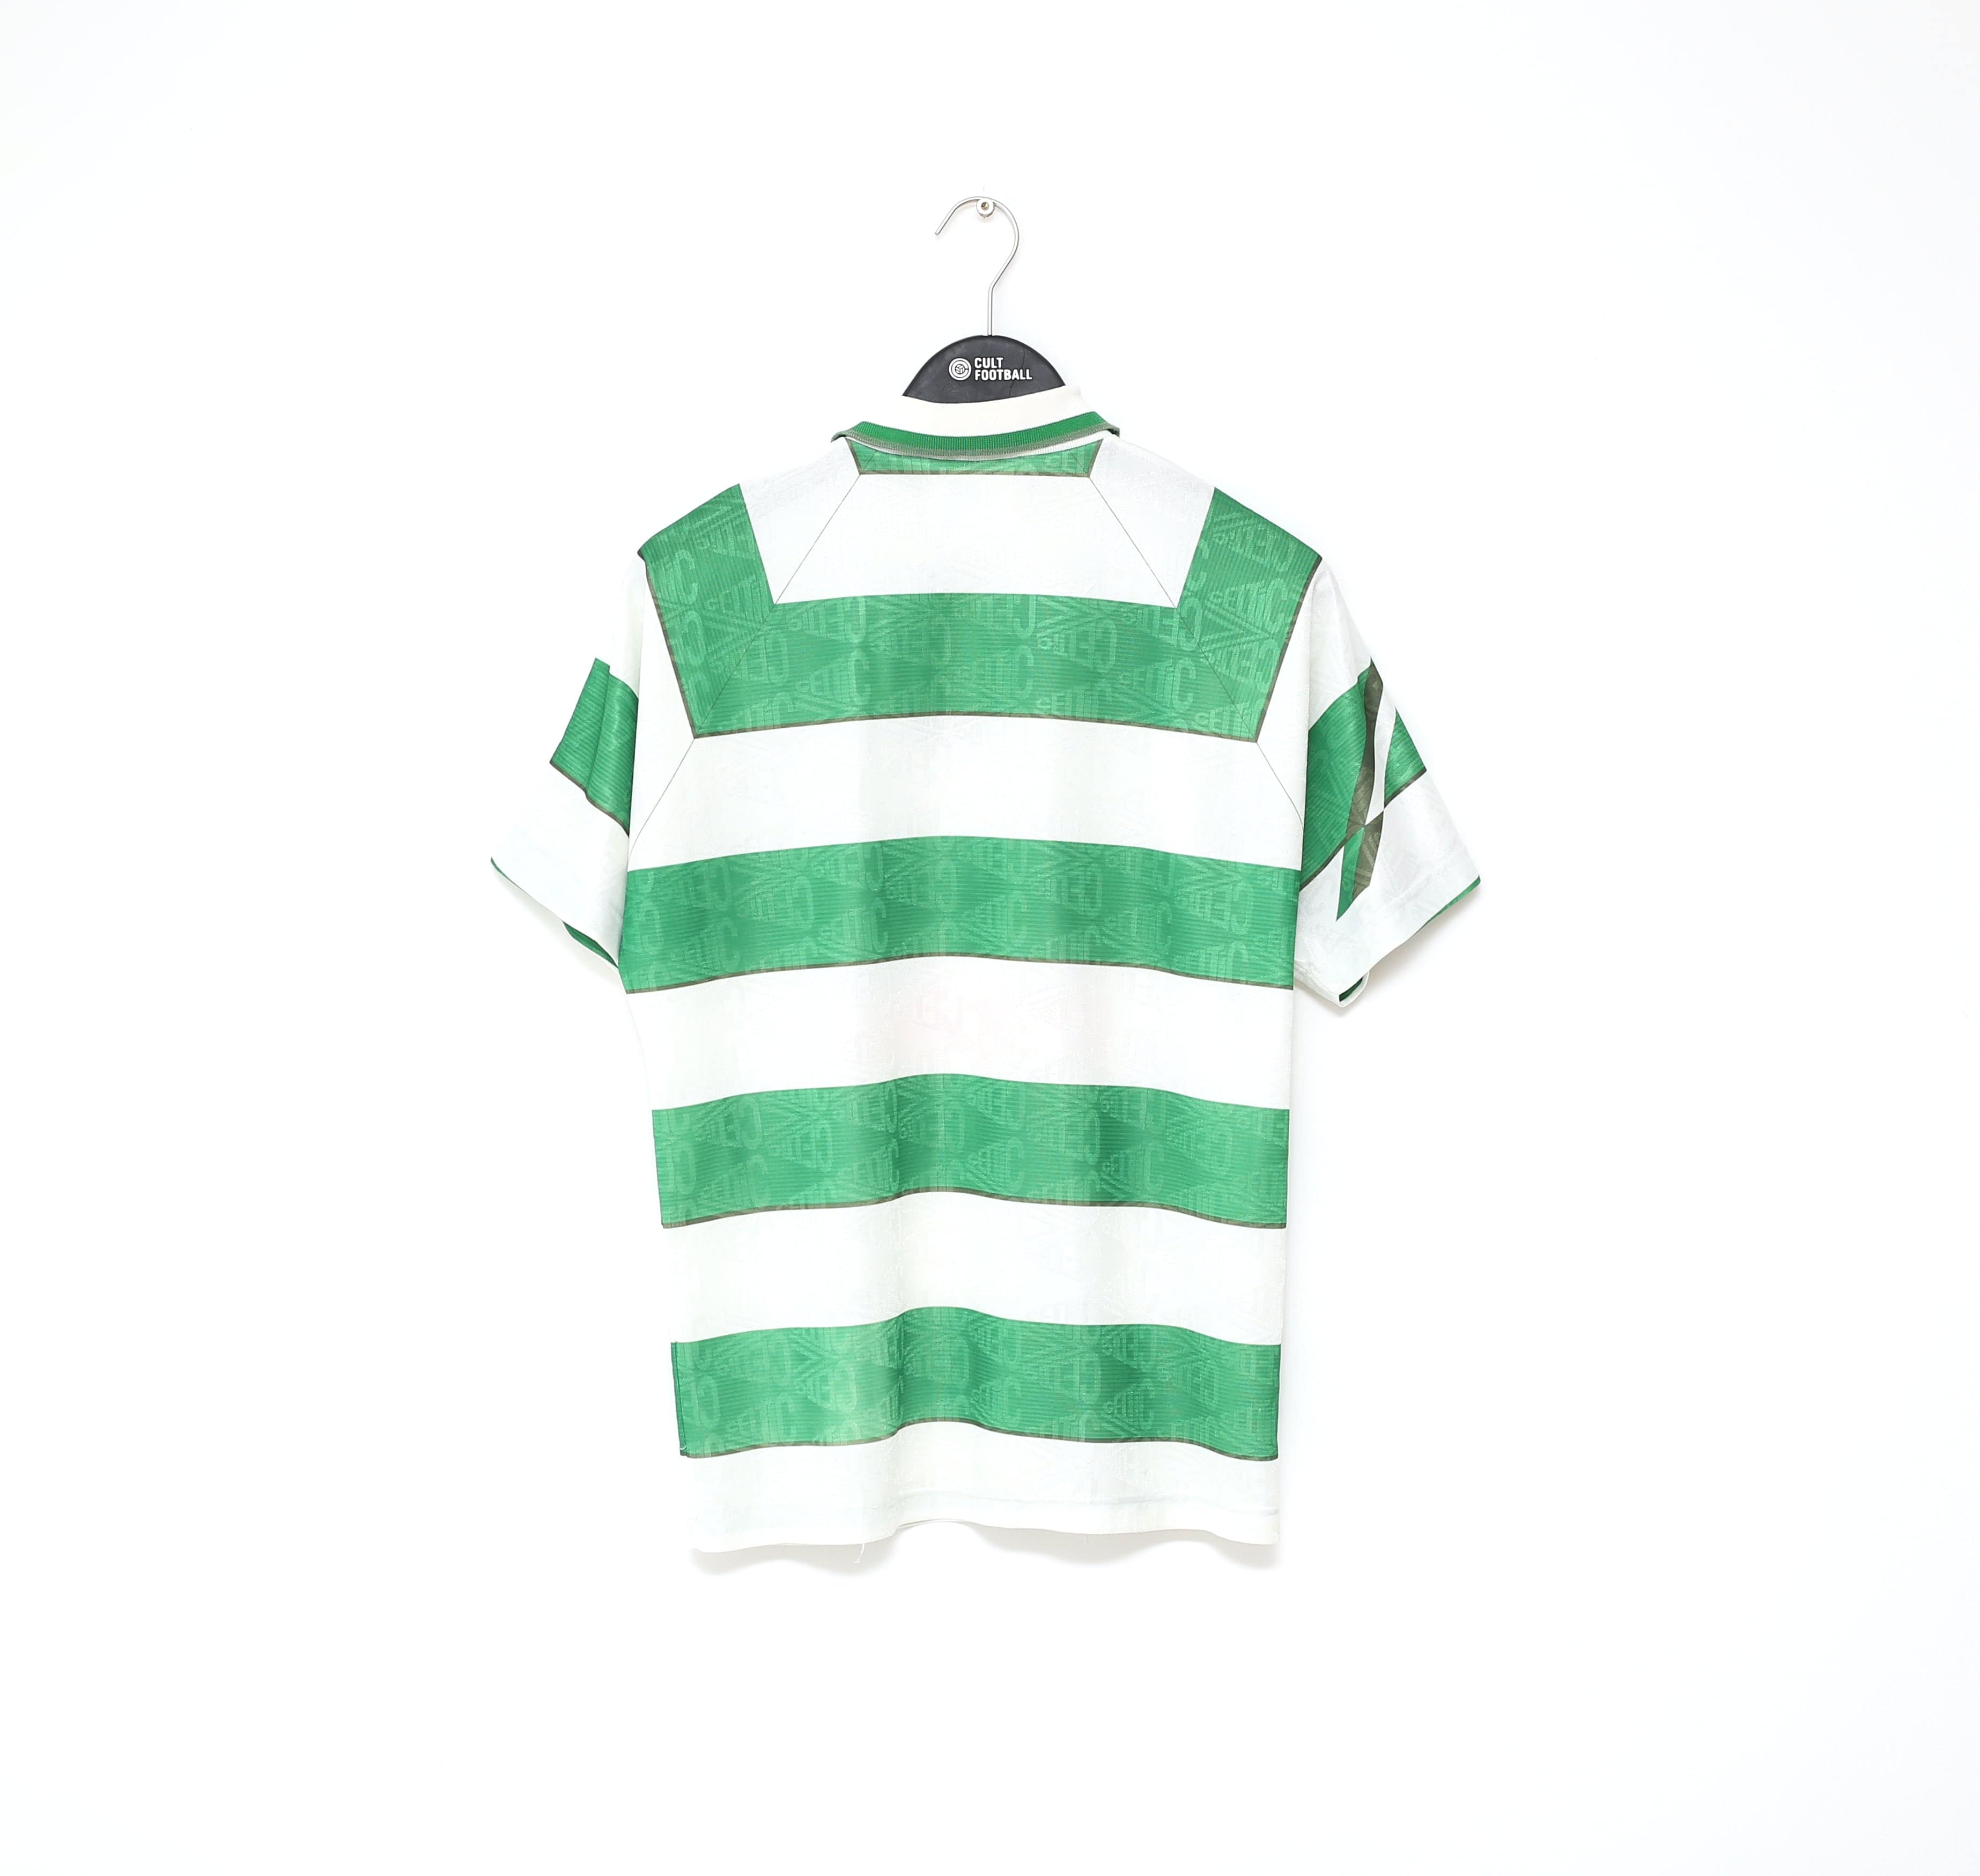 Retro Celtic Home Jersey 1991/92 By Umbro | Celtic